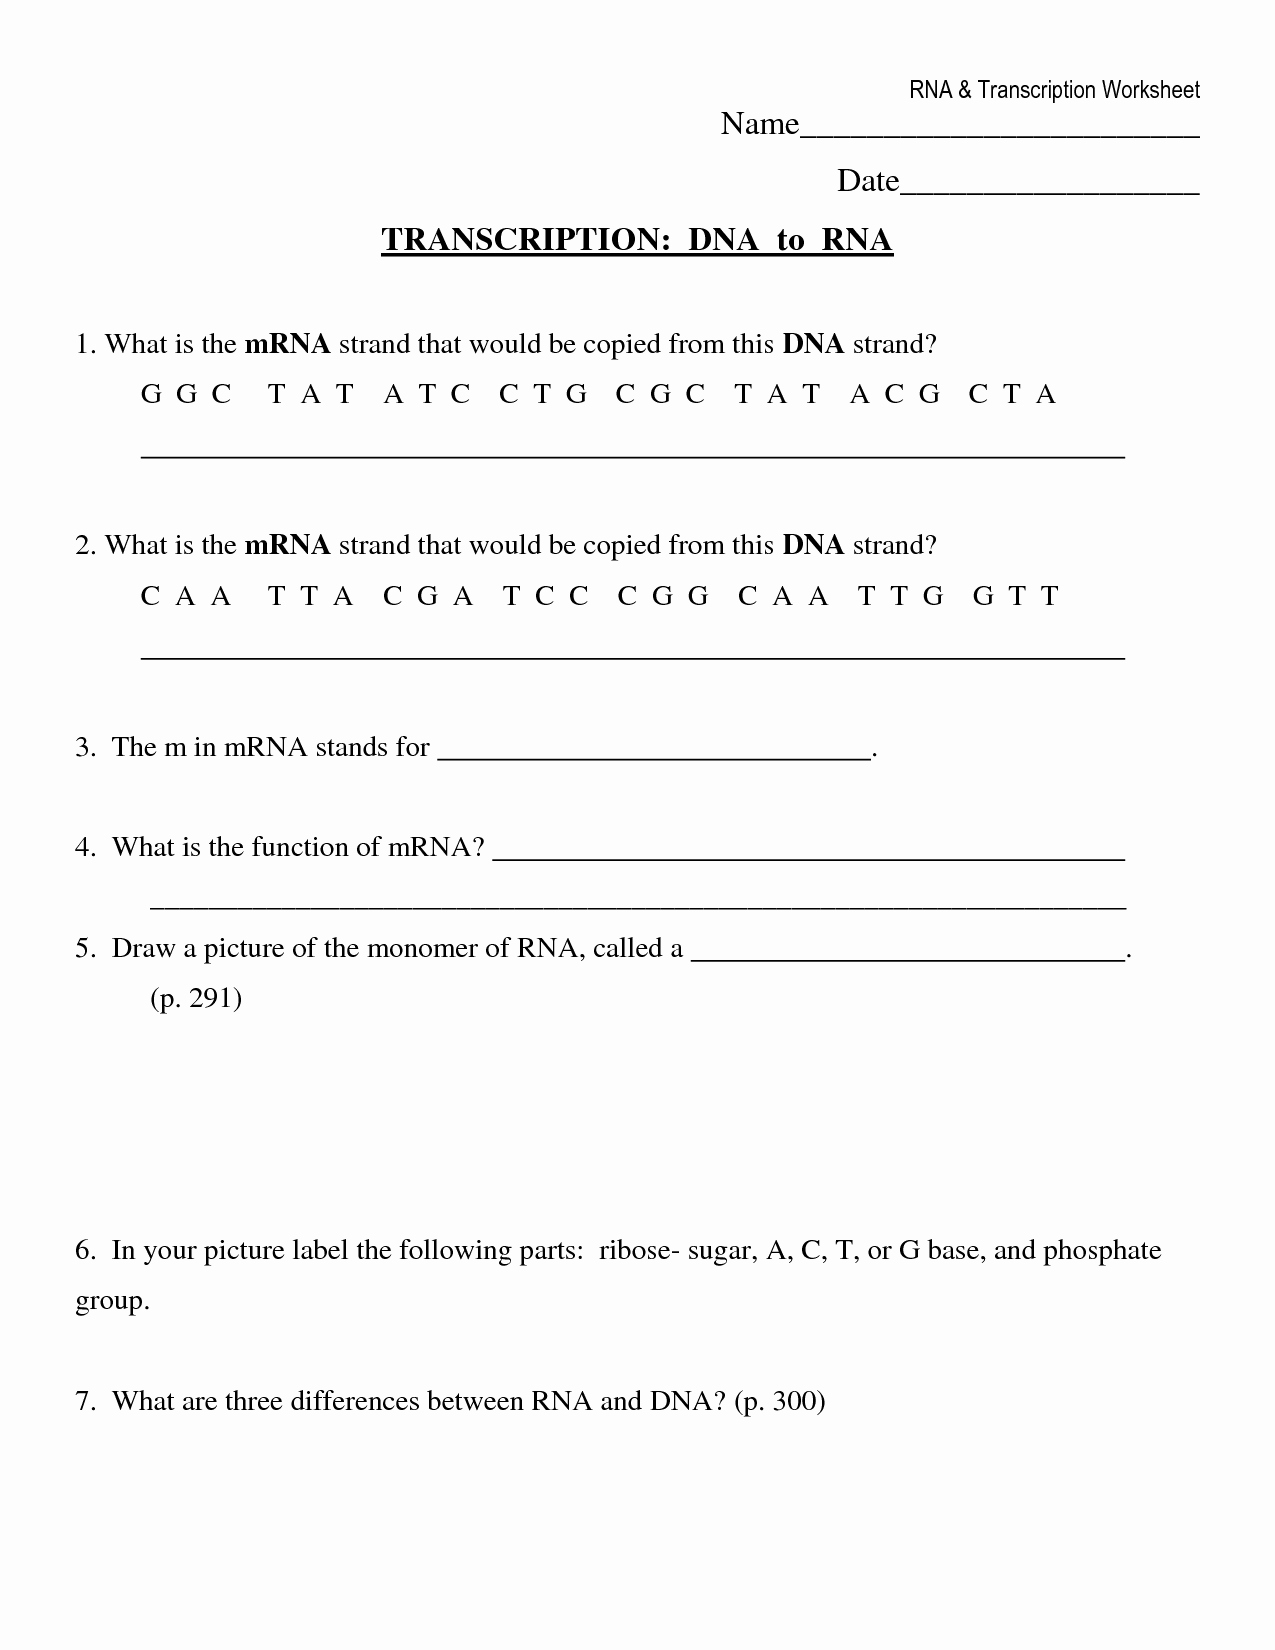 Dna and Rna Worksheet Answers Unique Transcription Worksheet Biological Science Picture